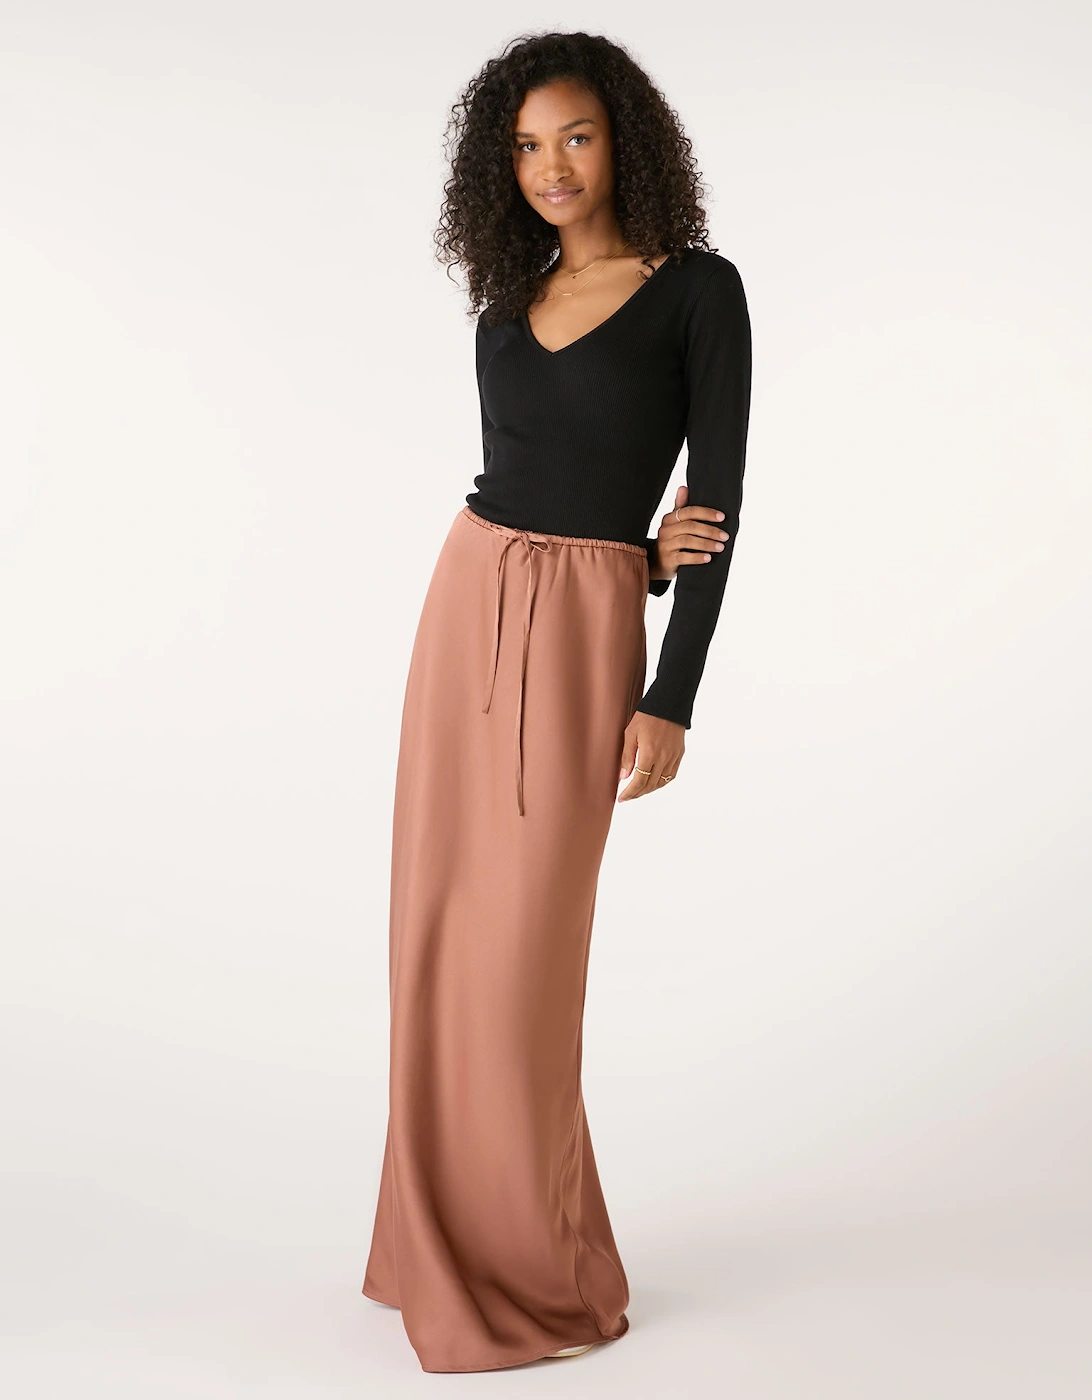 Flora Puddle Maxi Skirt in Bronze